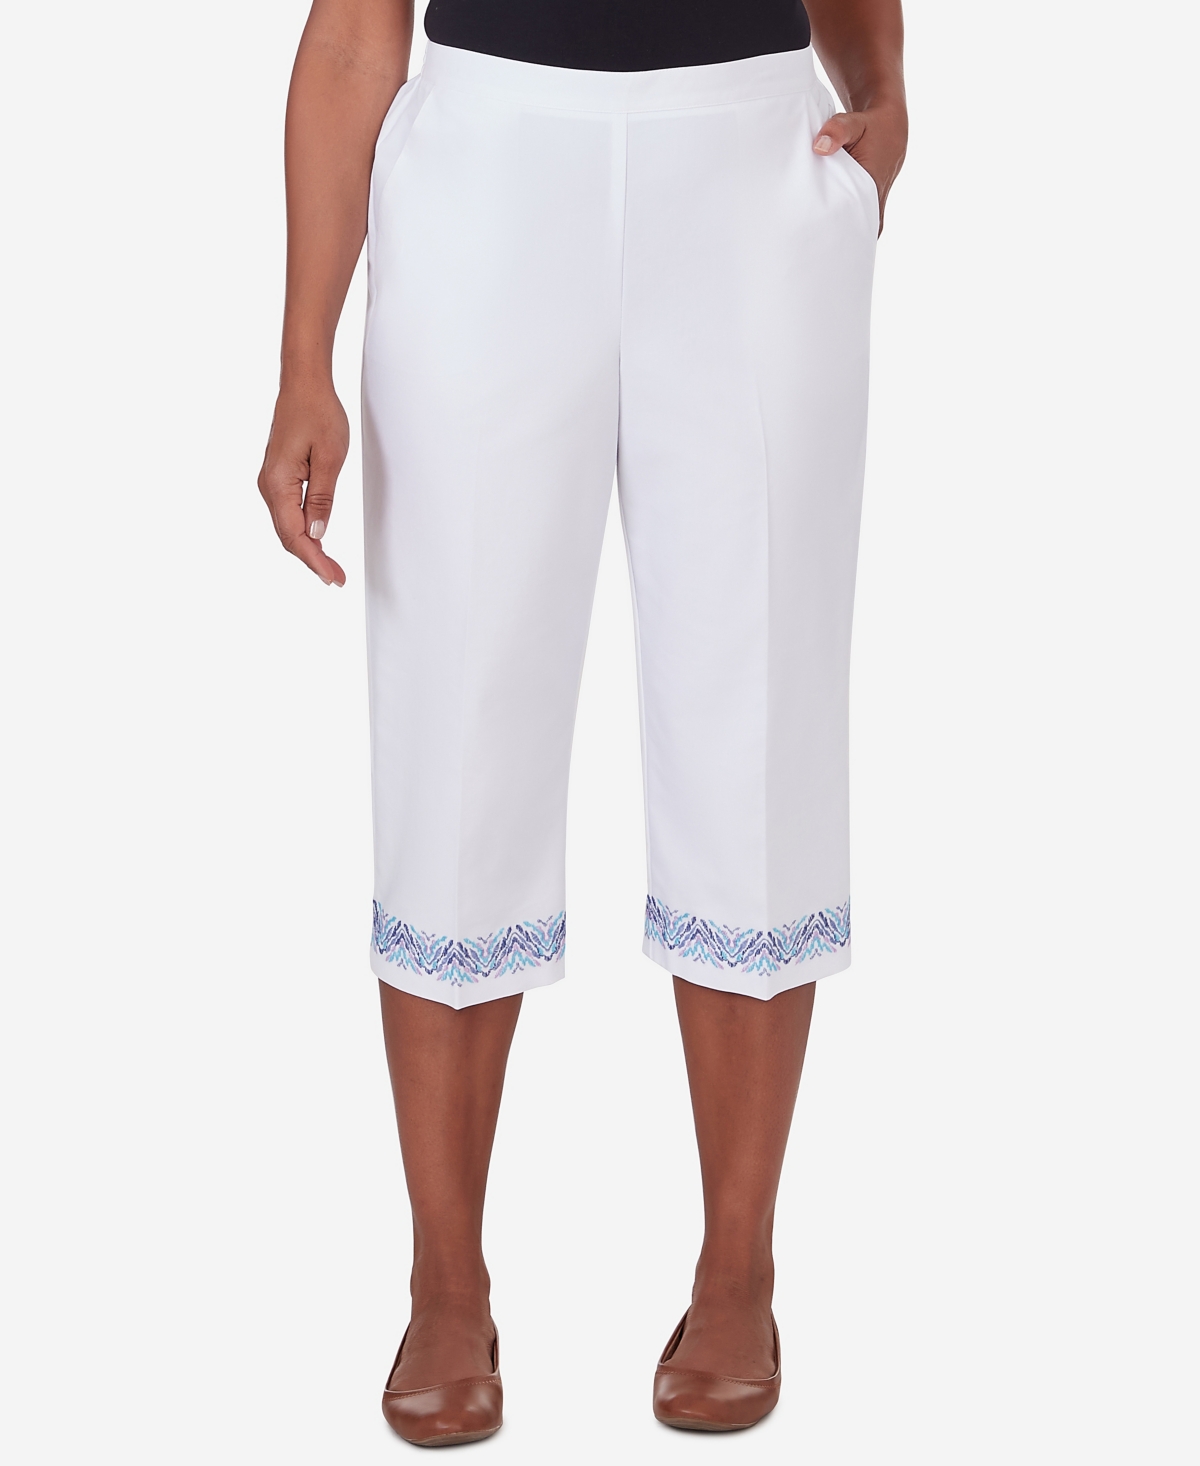 Alfred Dunner Petite Summer Breeze Pull-on Border Cuff Capri Pants In White